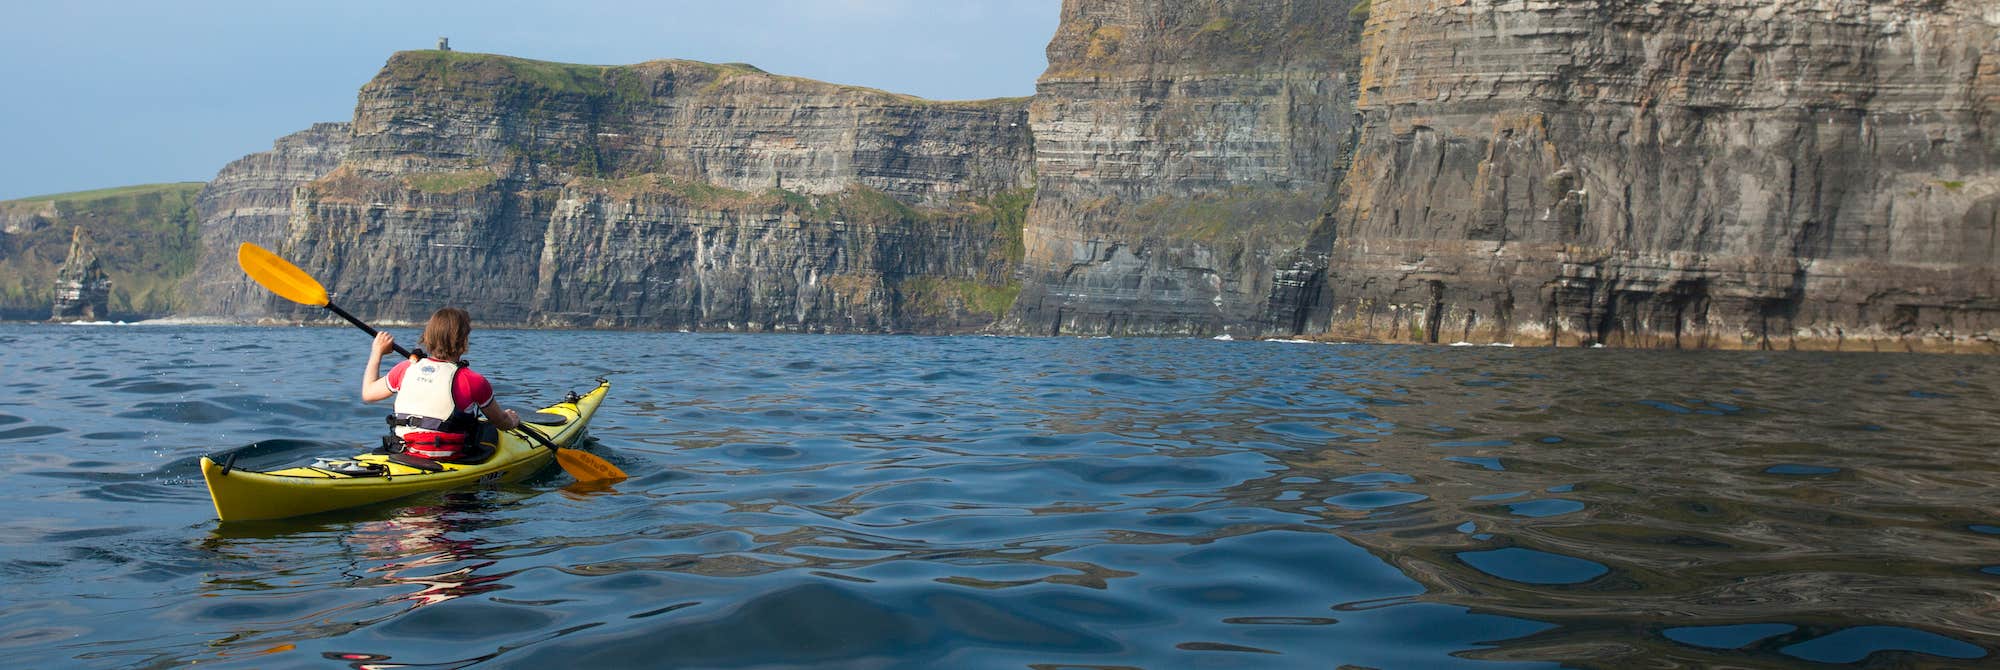 A person kayaking by the Cliffs of Moher in County Clare